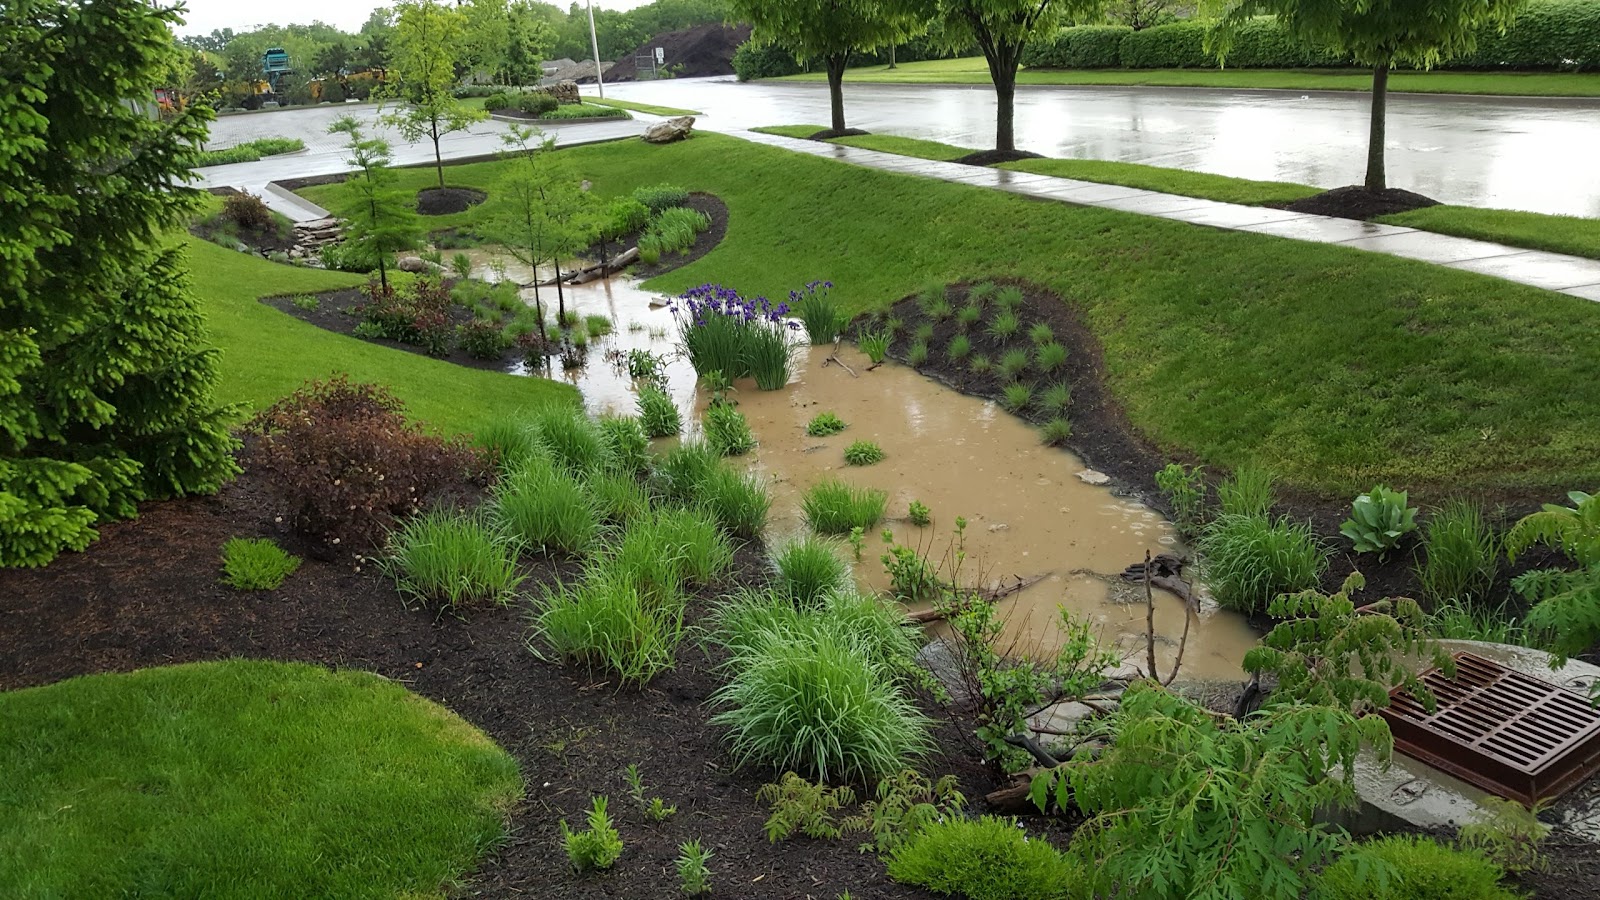 Effective Stormwater Management: Installing Bioswales - The Edge from the  National Association of Landscape Professionals